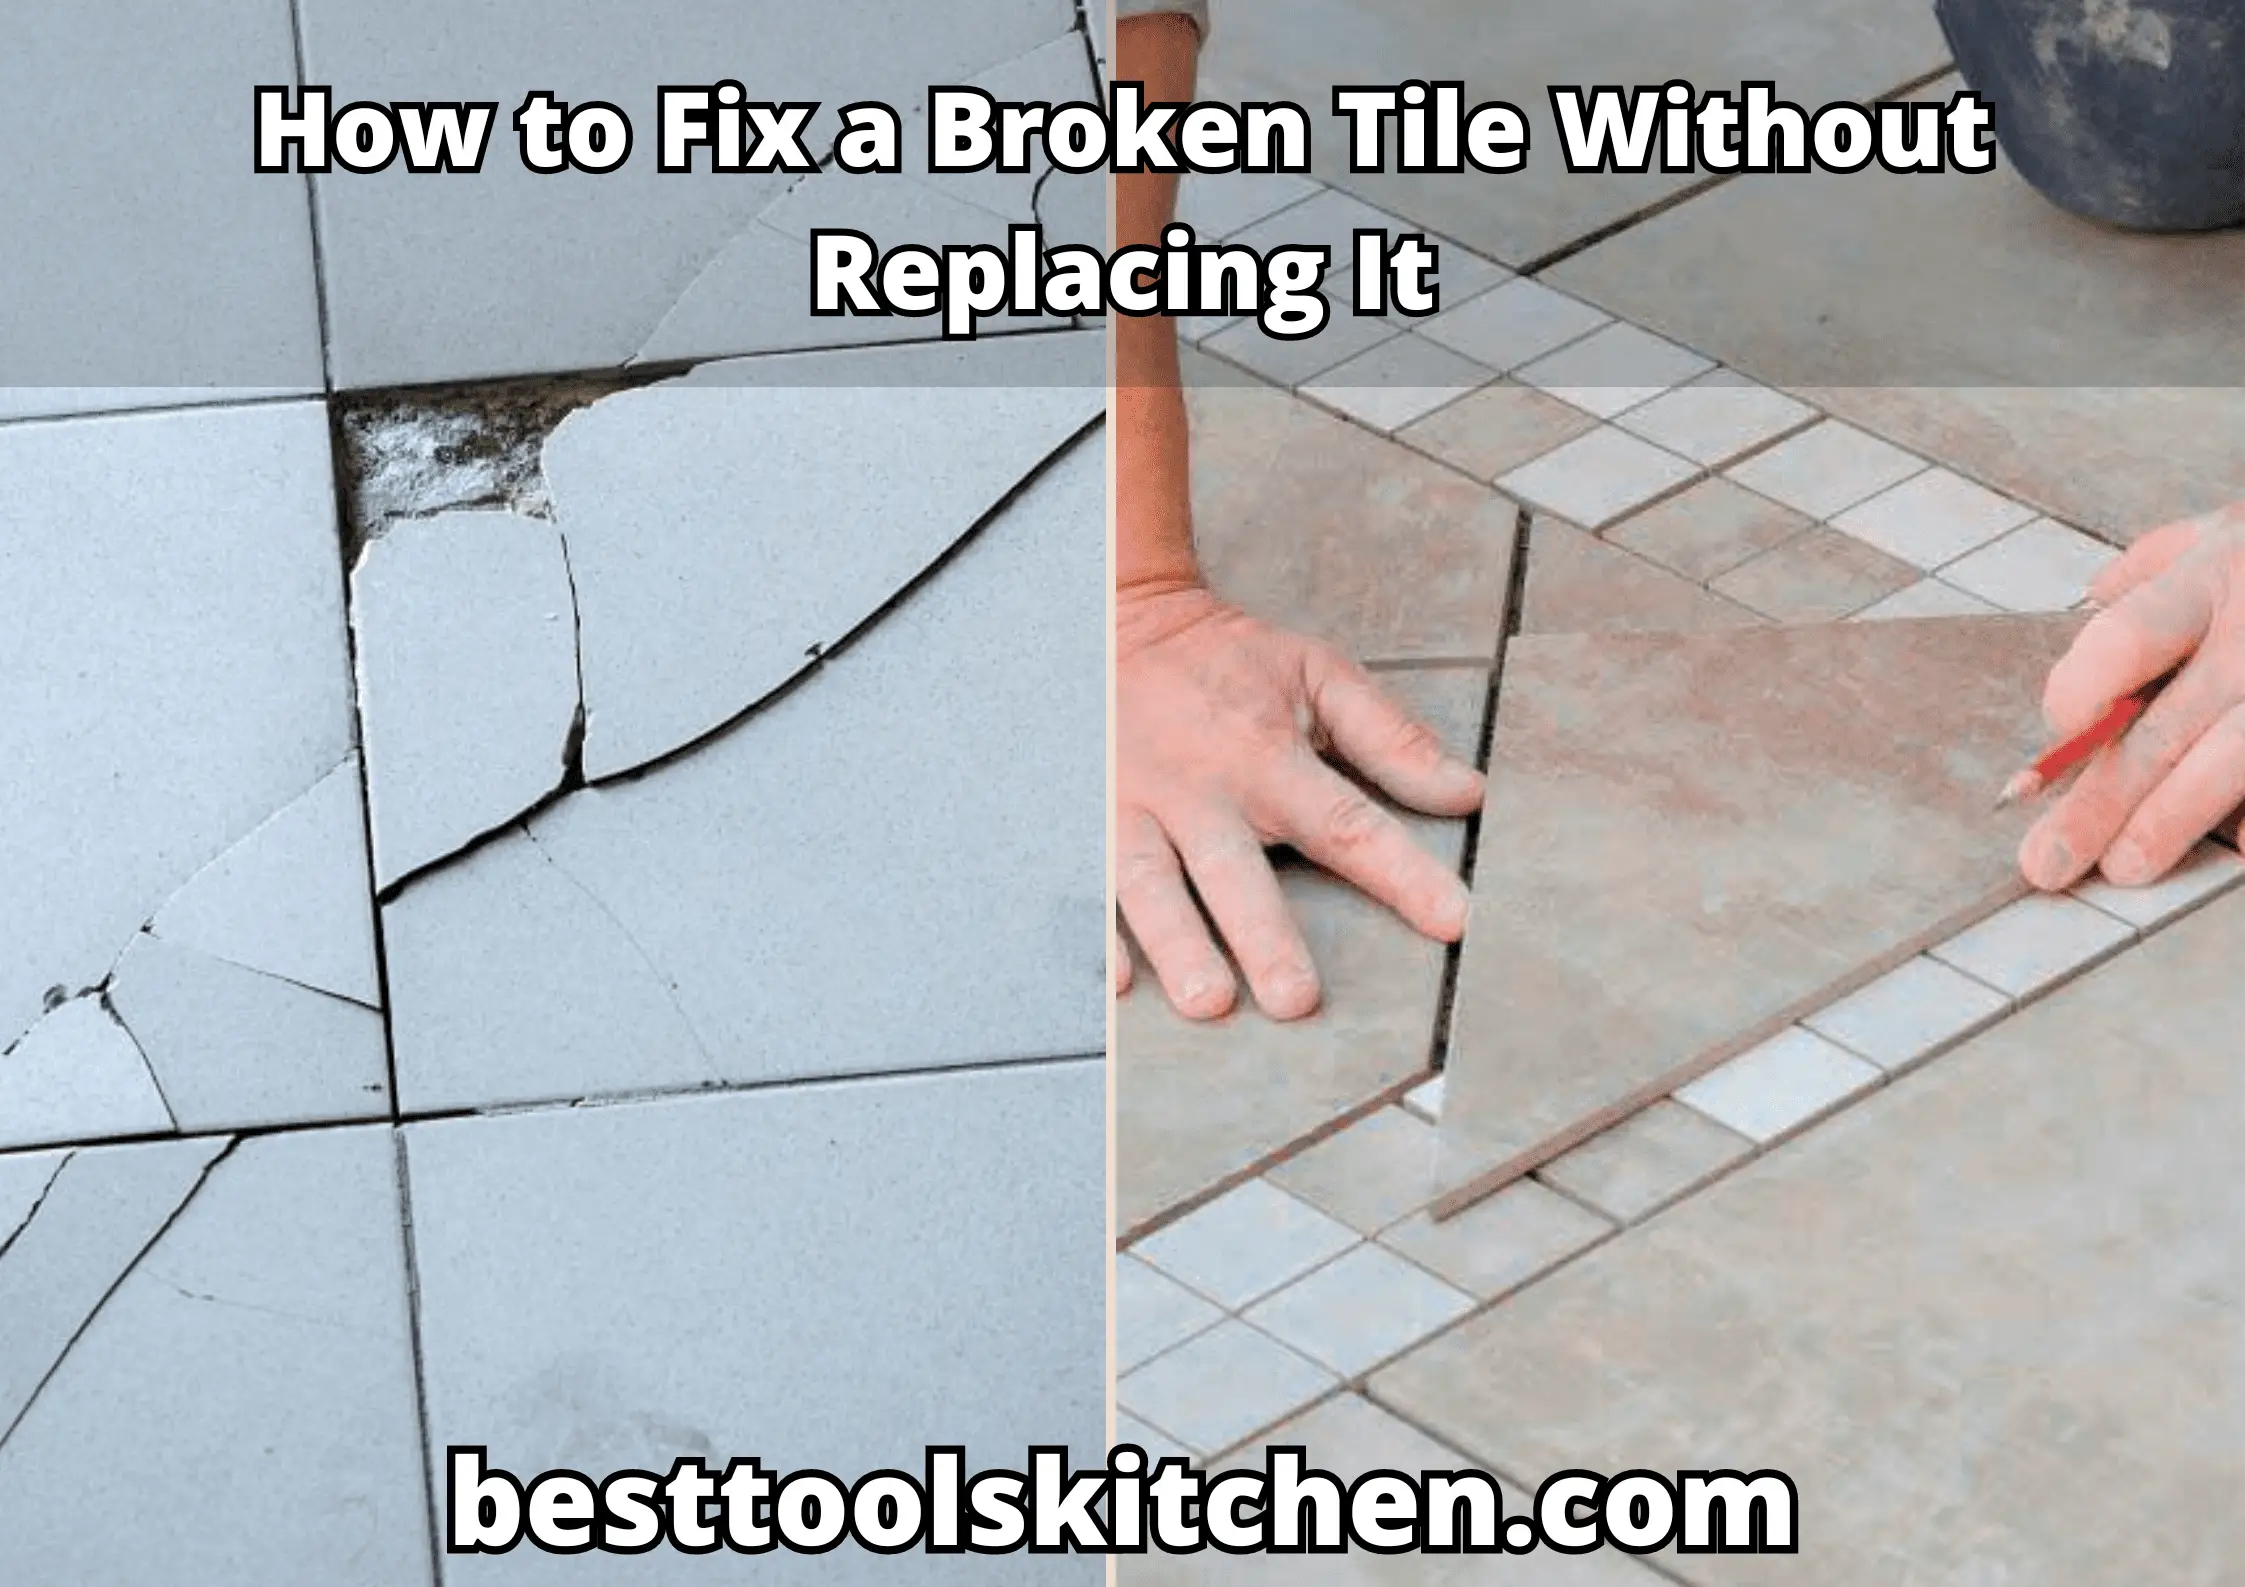 How to Fix a Broken Tile Without Replacing It